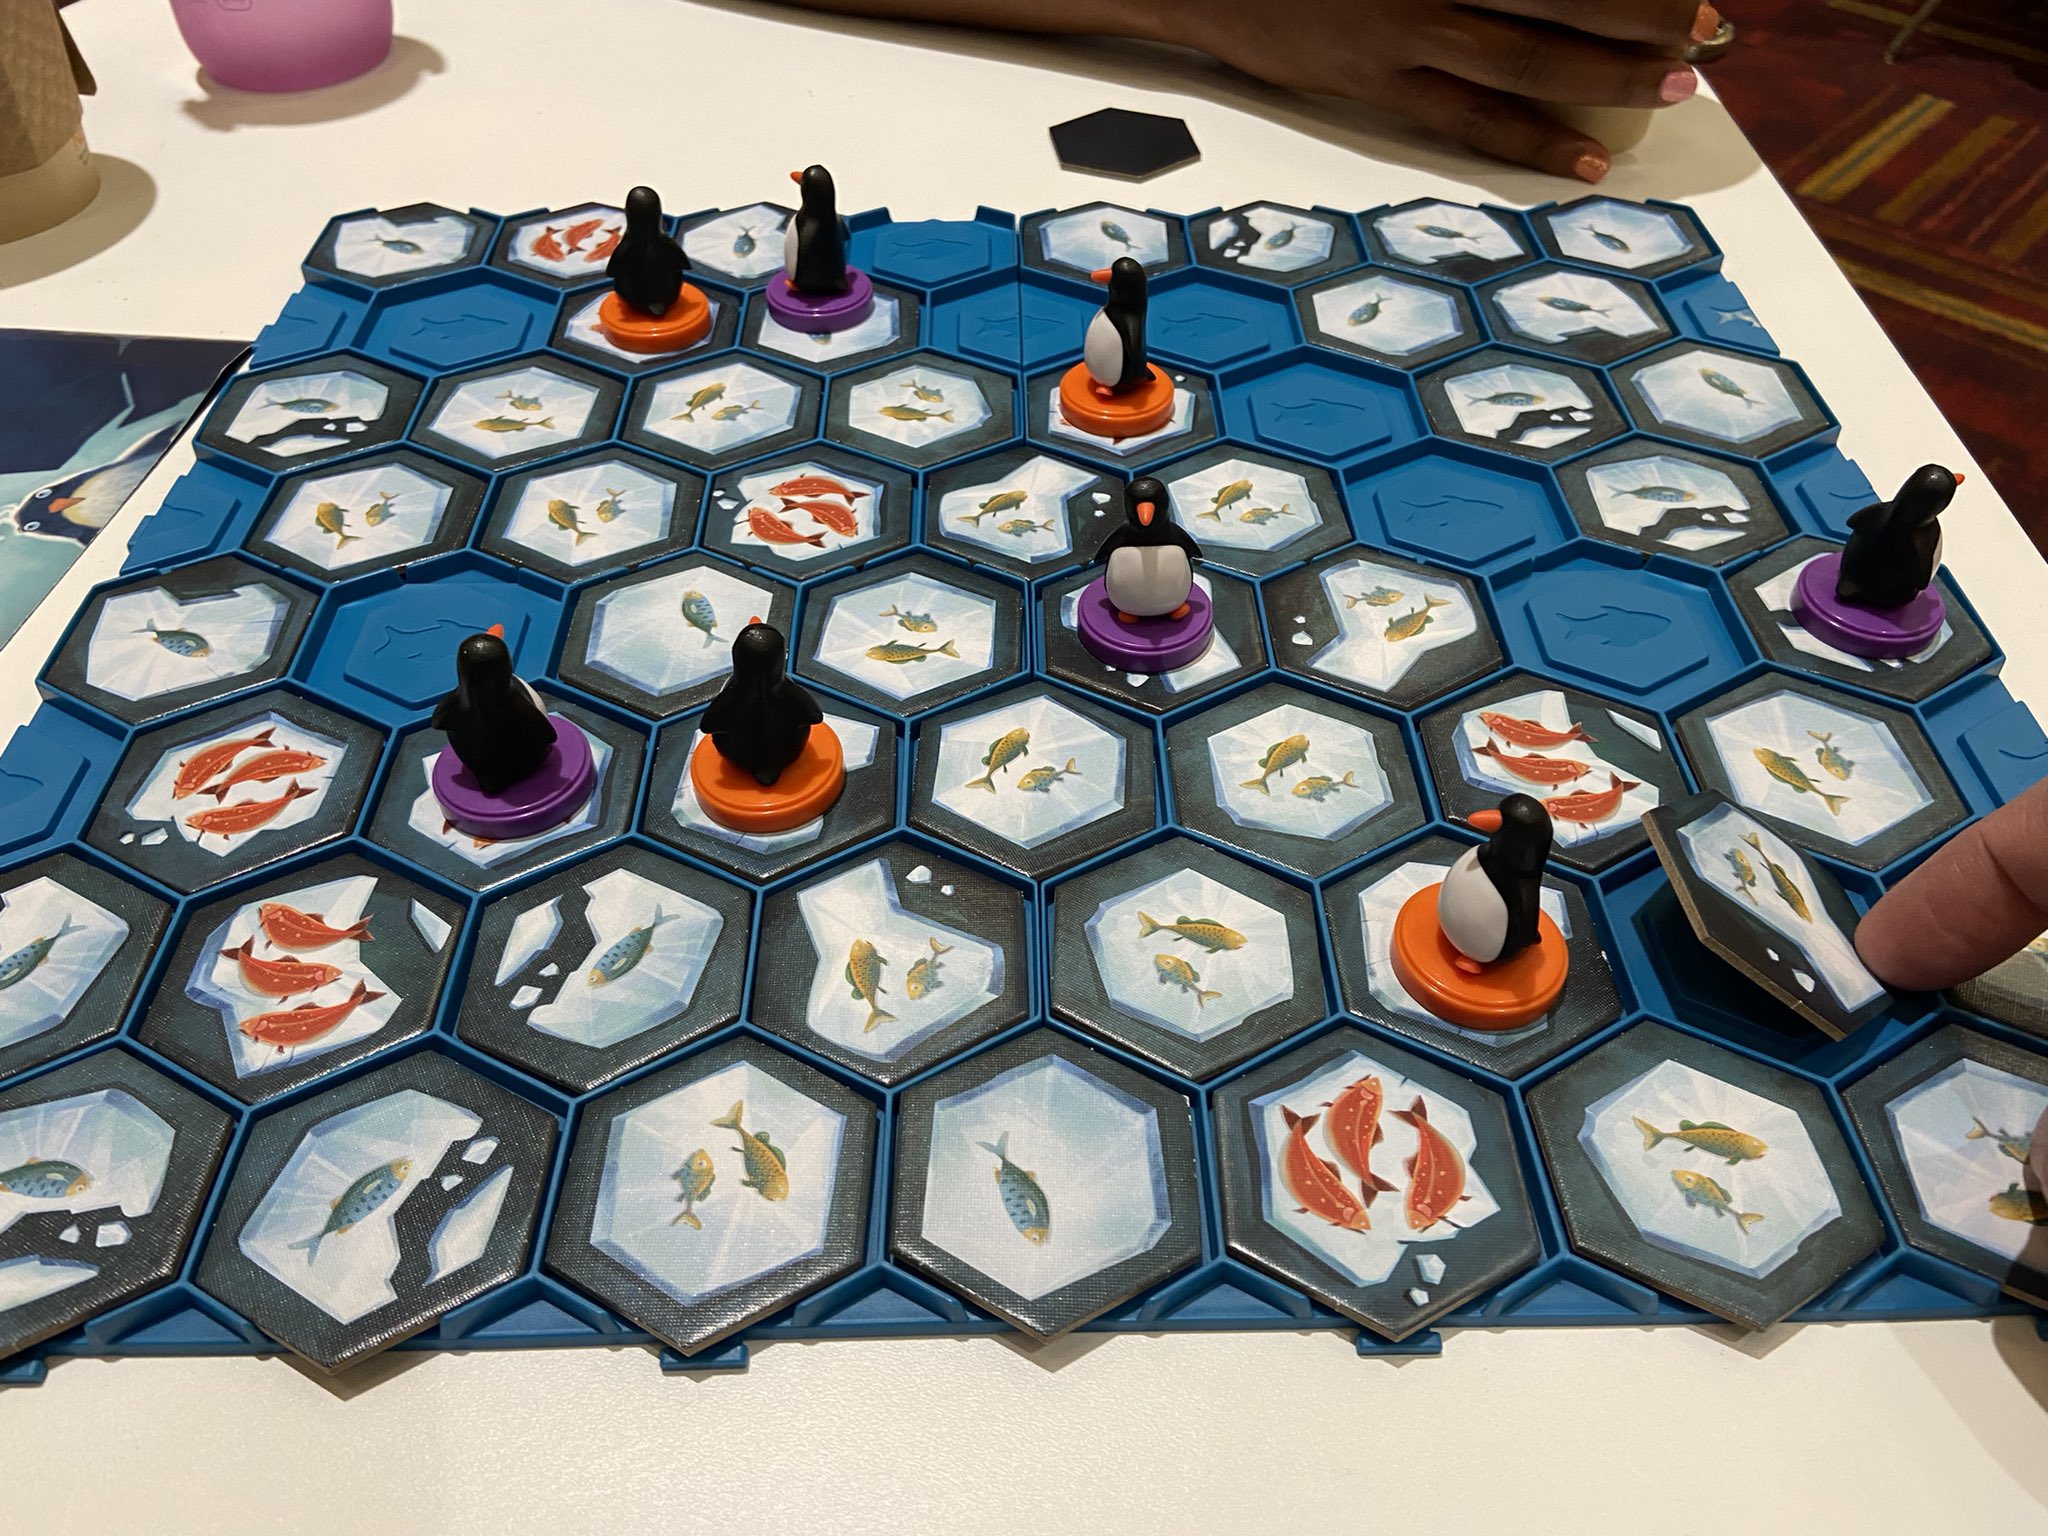 BoardGameGeek on X: The new edition of Hey, That's My Fish